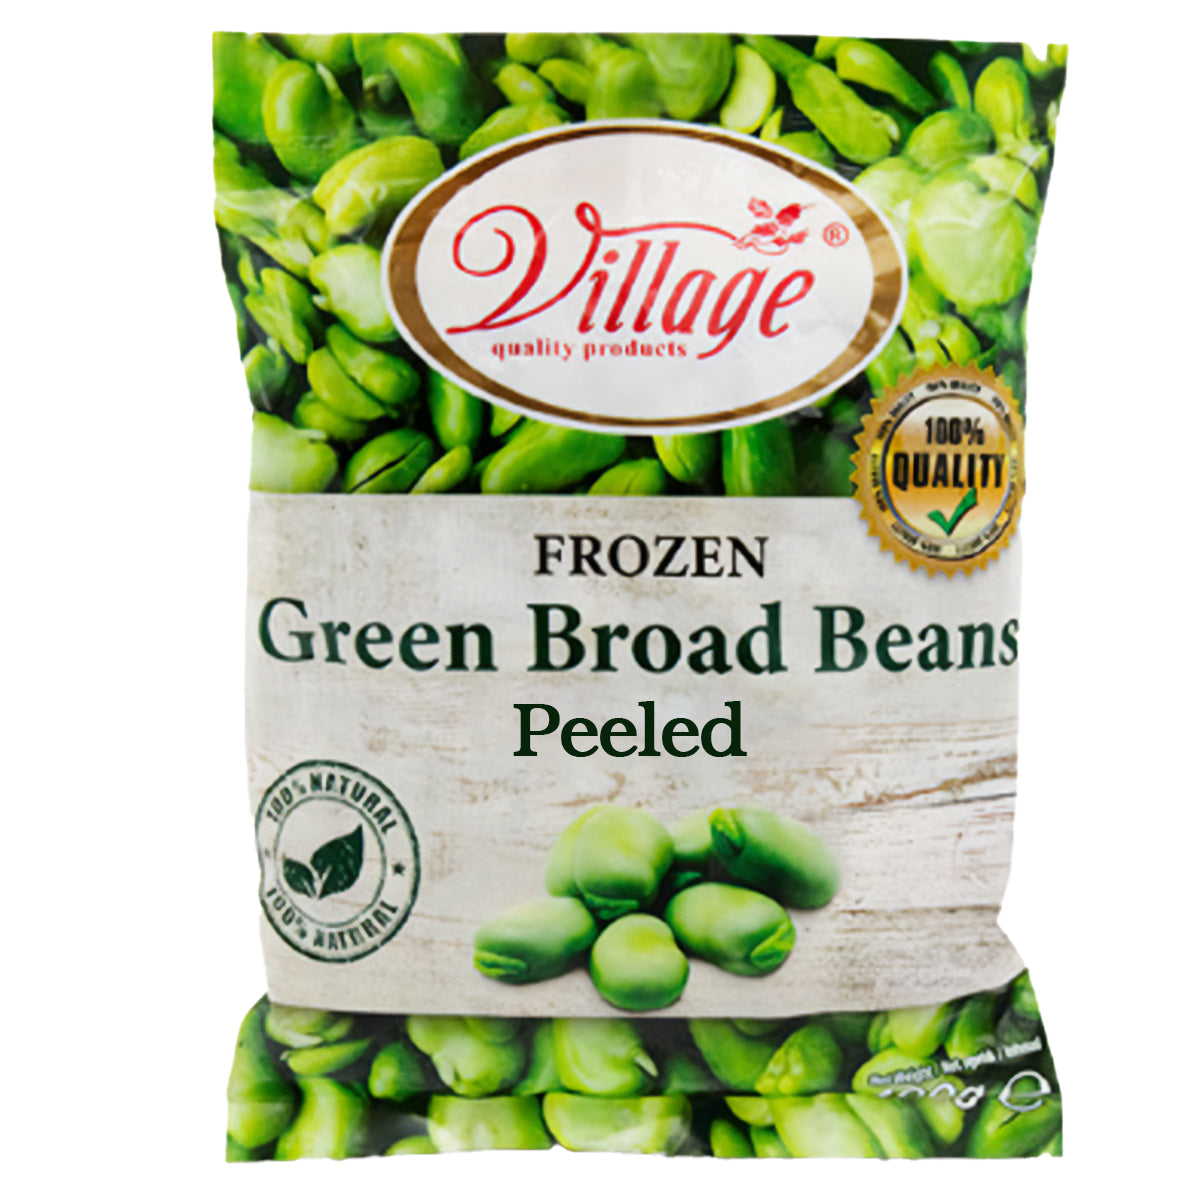 Village - Green Peeled Broad Beans - 400g frozen green broad beans peeled.